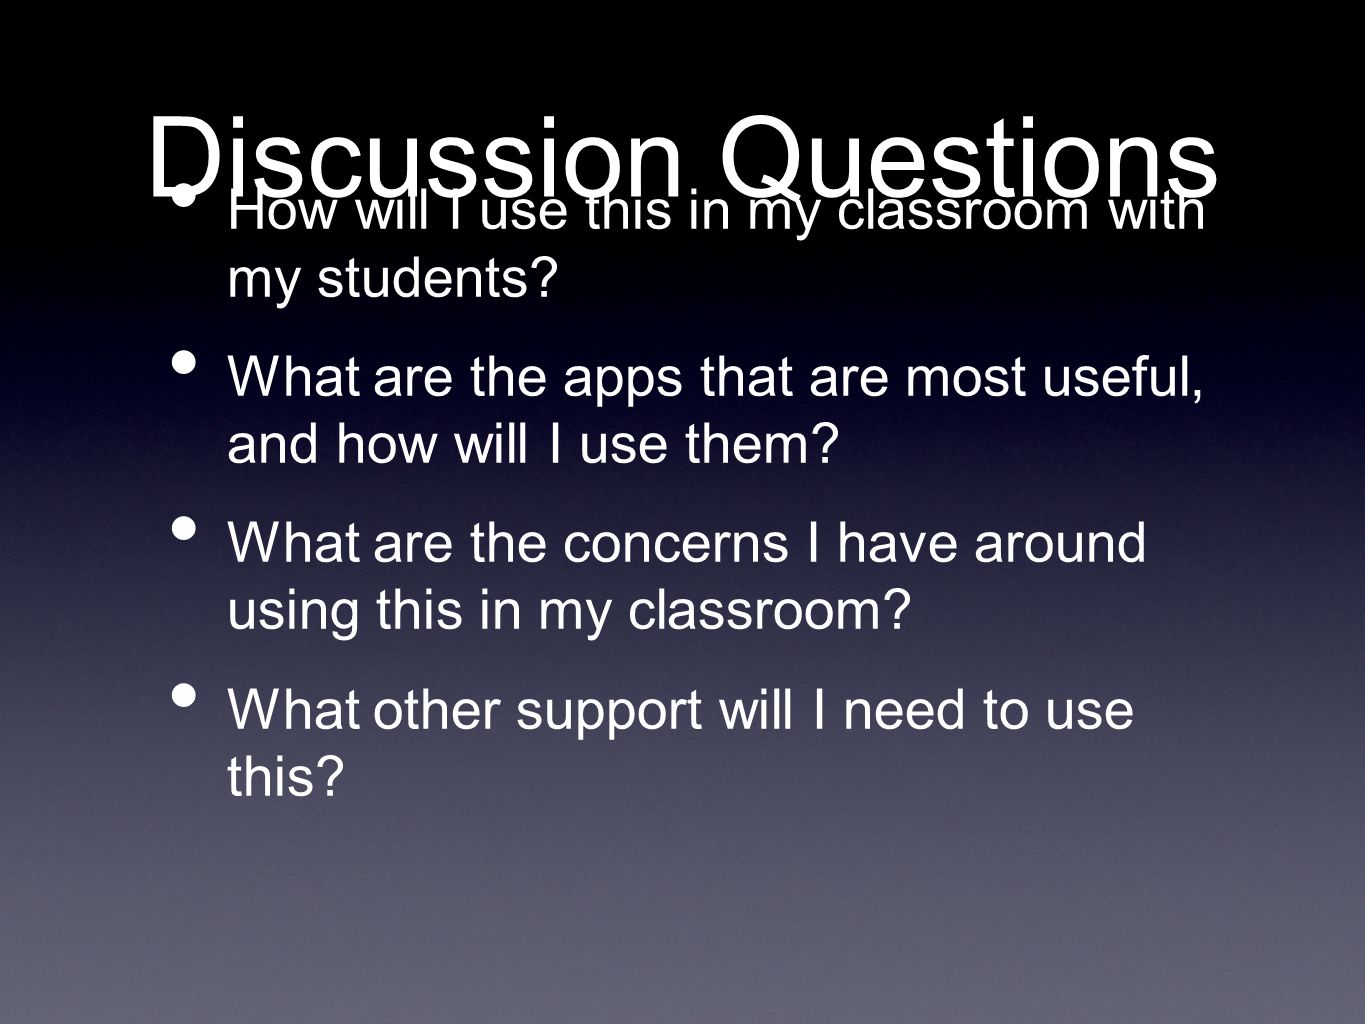 Discussion Questions How will I use this in my classroom with my students.